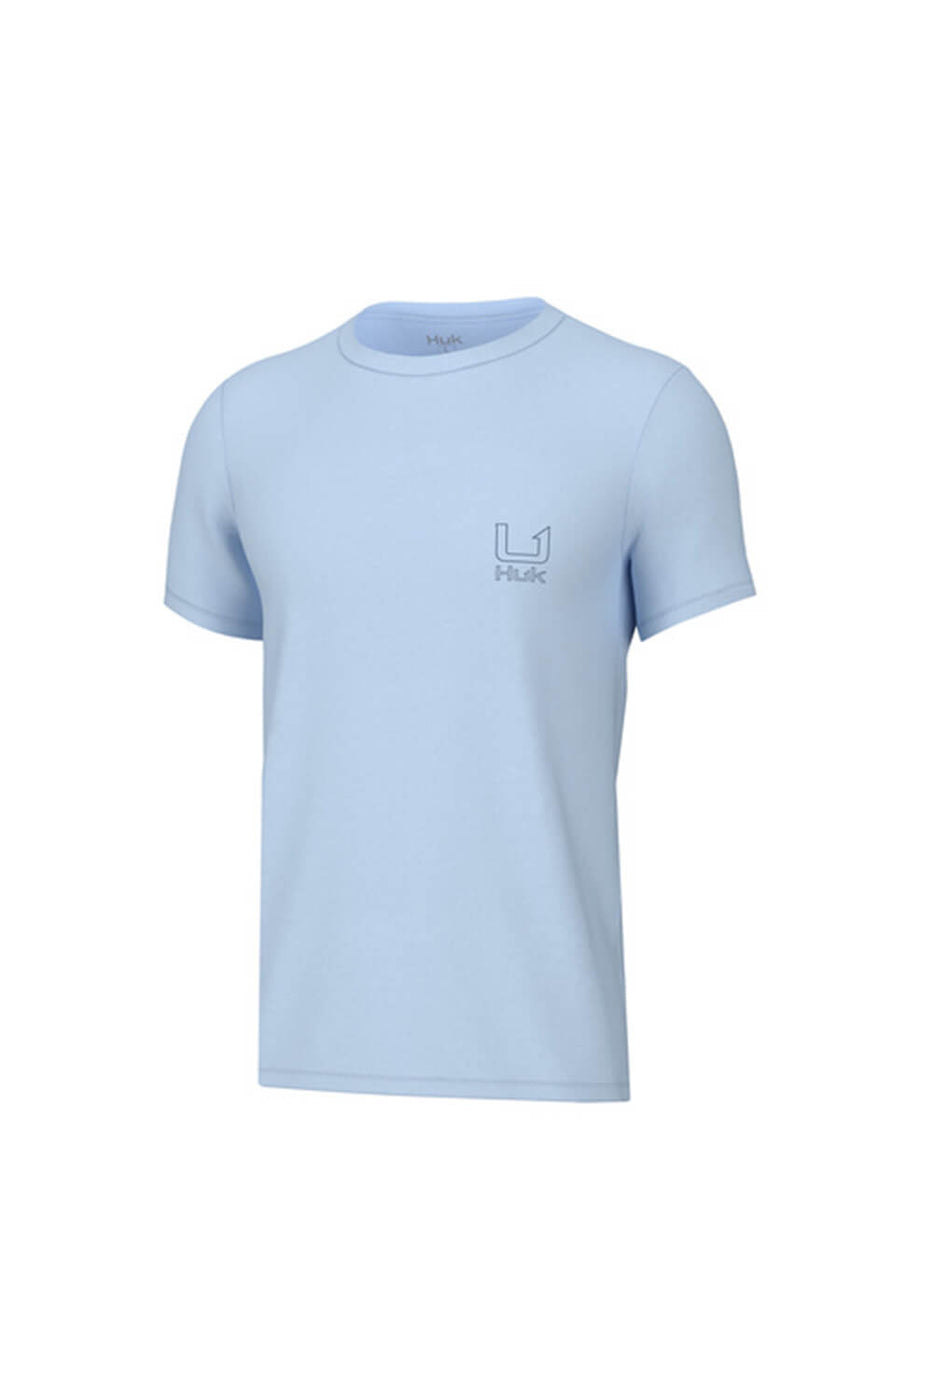 Huk Fishing Youth Salute T-Shirt for Boys in Blue